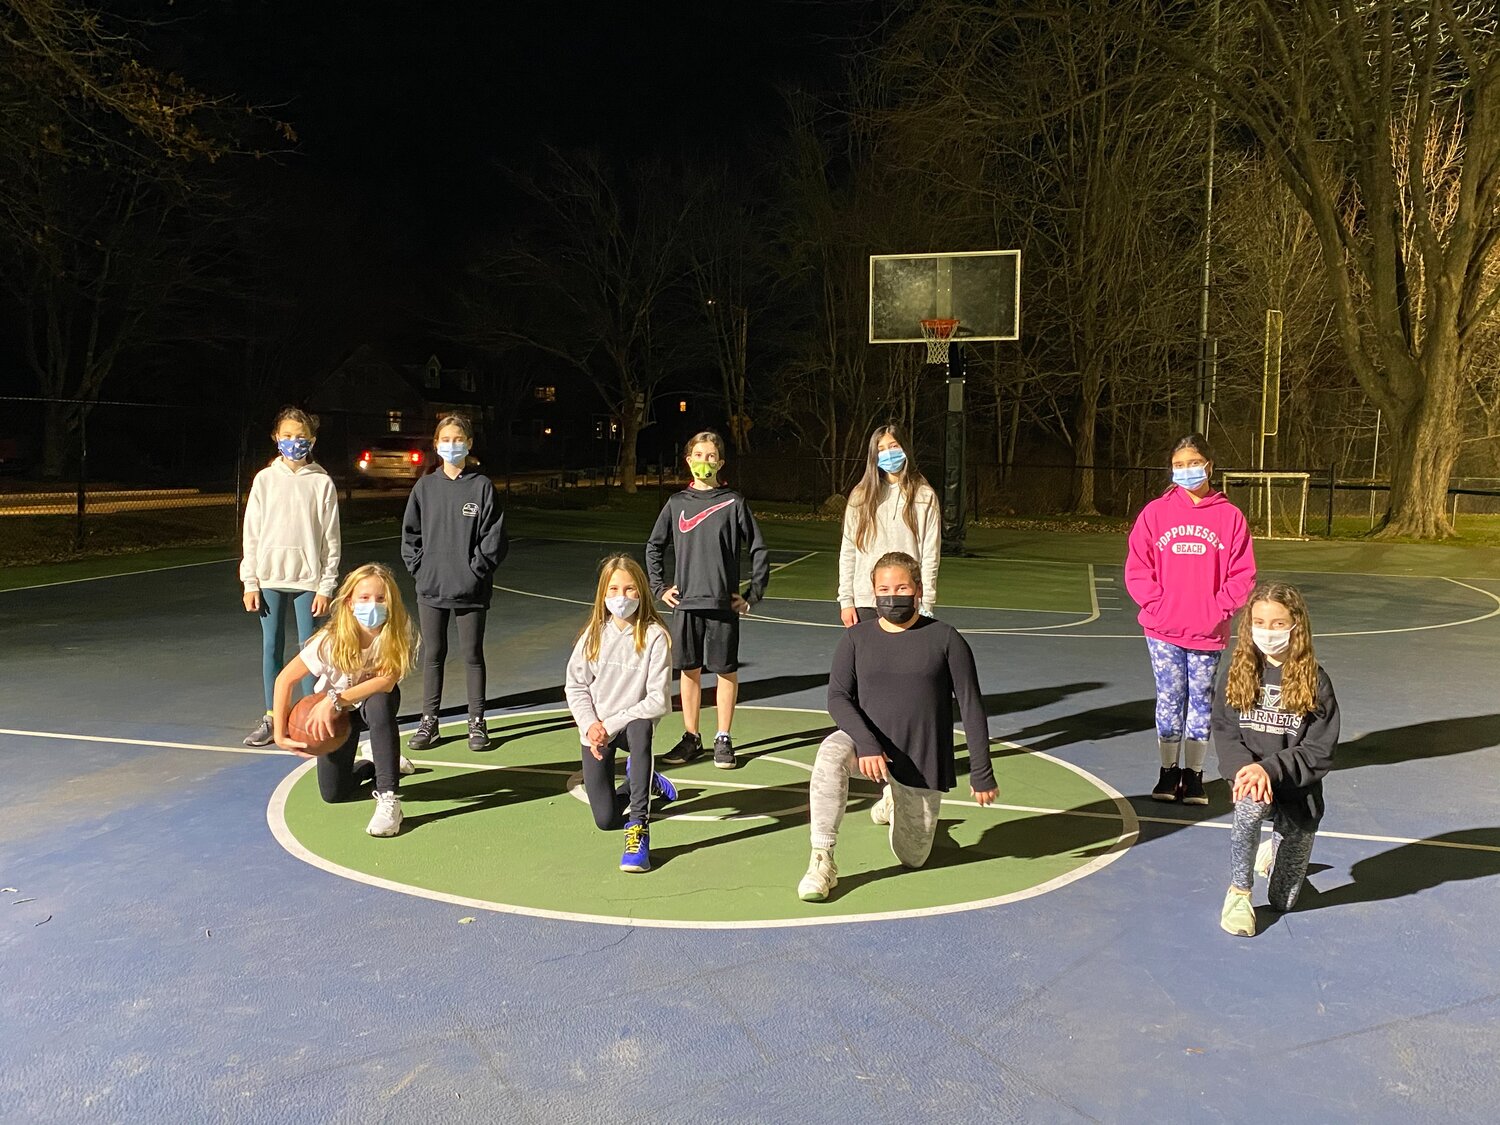 Thanks to Community Preservation and the work done by Manchester Electric the 6th grade girls basketball team was able to play under the refurbished lights at Sweeney Park. Pictured in the front row are; Bianca Torre, Sadie Potter, Jules D’Andrea and Madeleine Franco. In the back row; Maggie Whitman, Miriam Garrett-Metz, Emerald Jakes, Hazelle Steriti and Maya Frangioso. Not pictured is Cate Vendt. 